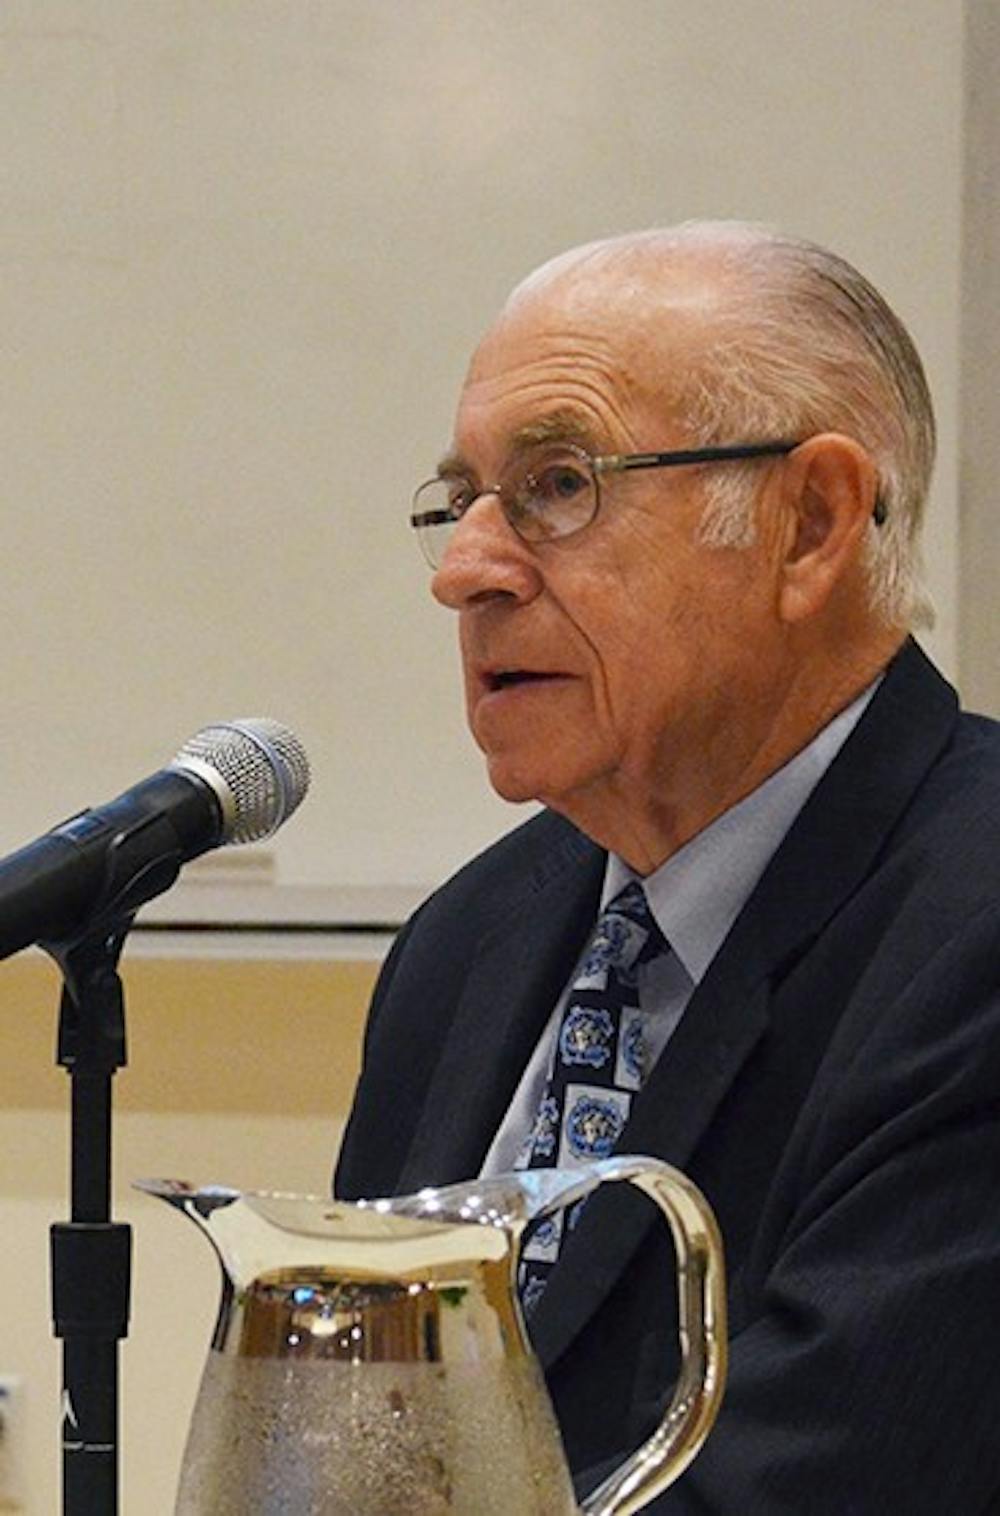 	NPR newscaster Carl Kasell spoke about breaking stories on Tuesday evening in Carroll Hall.